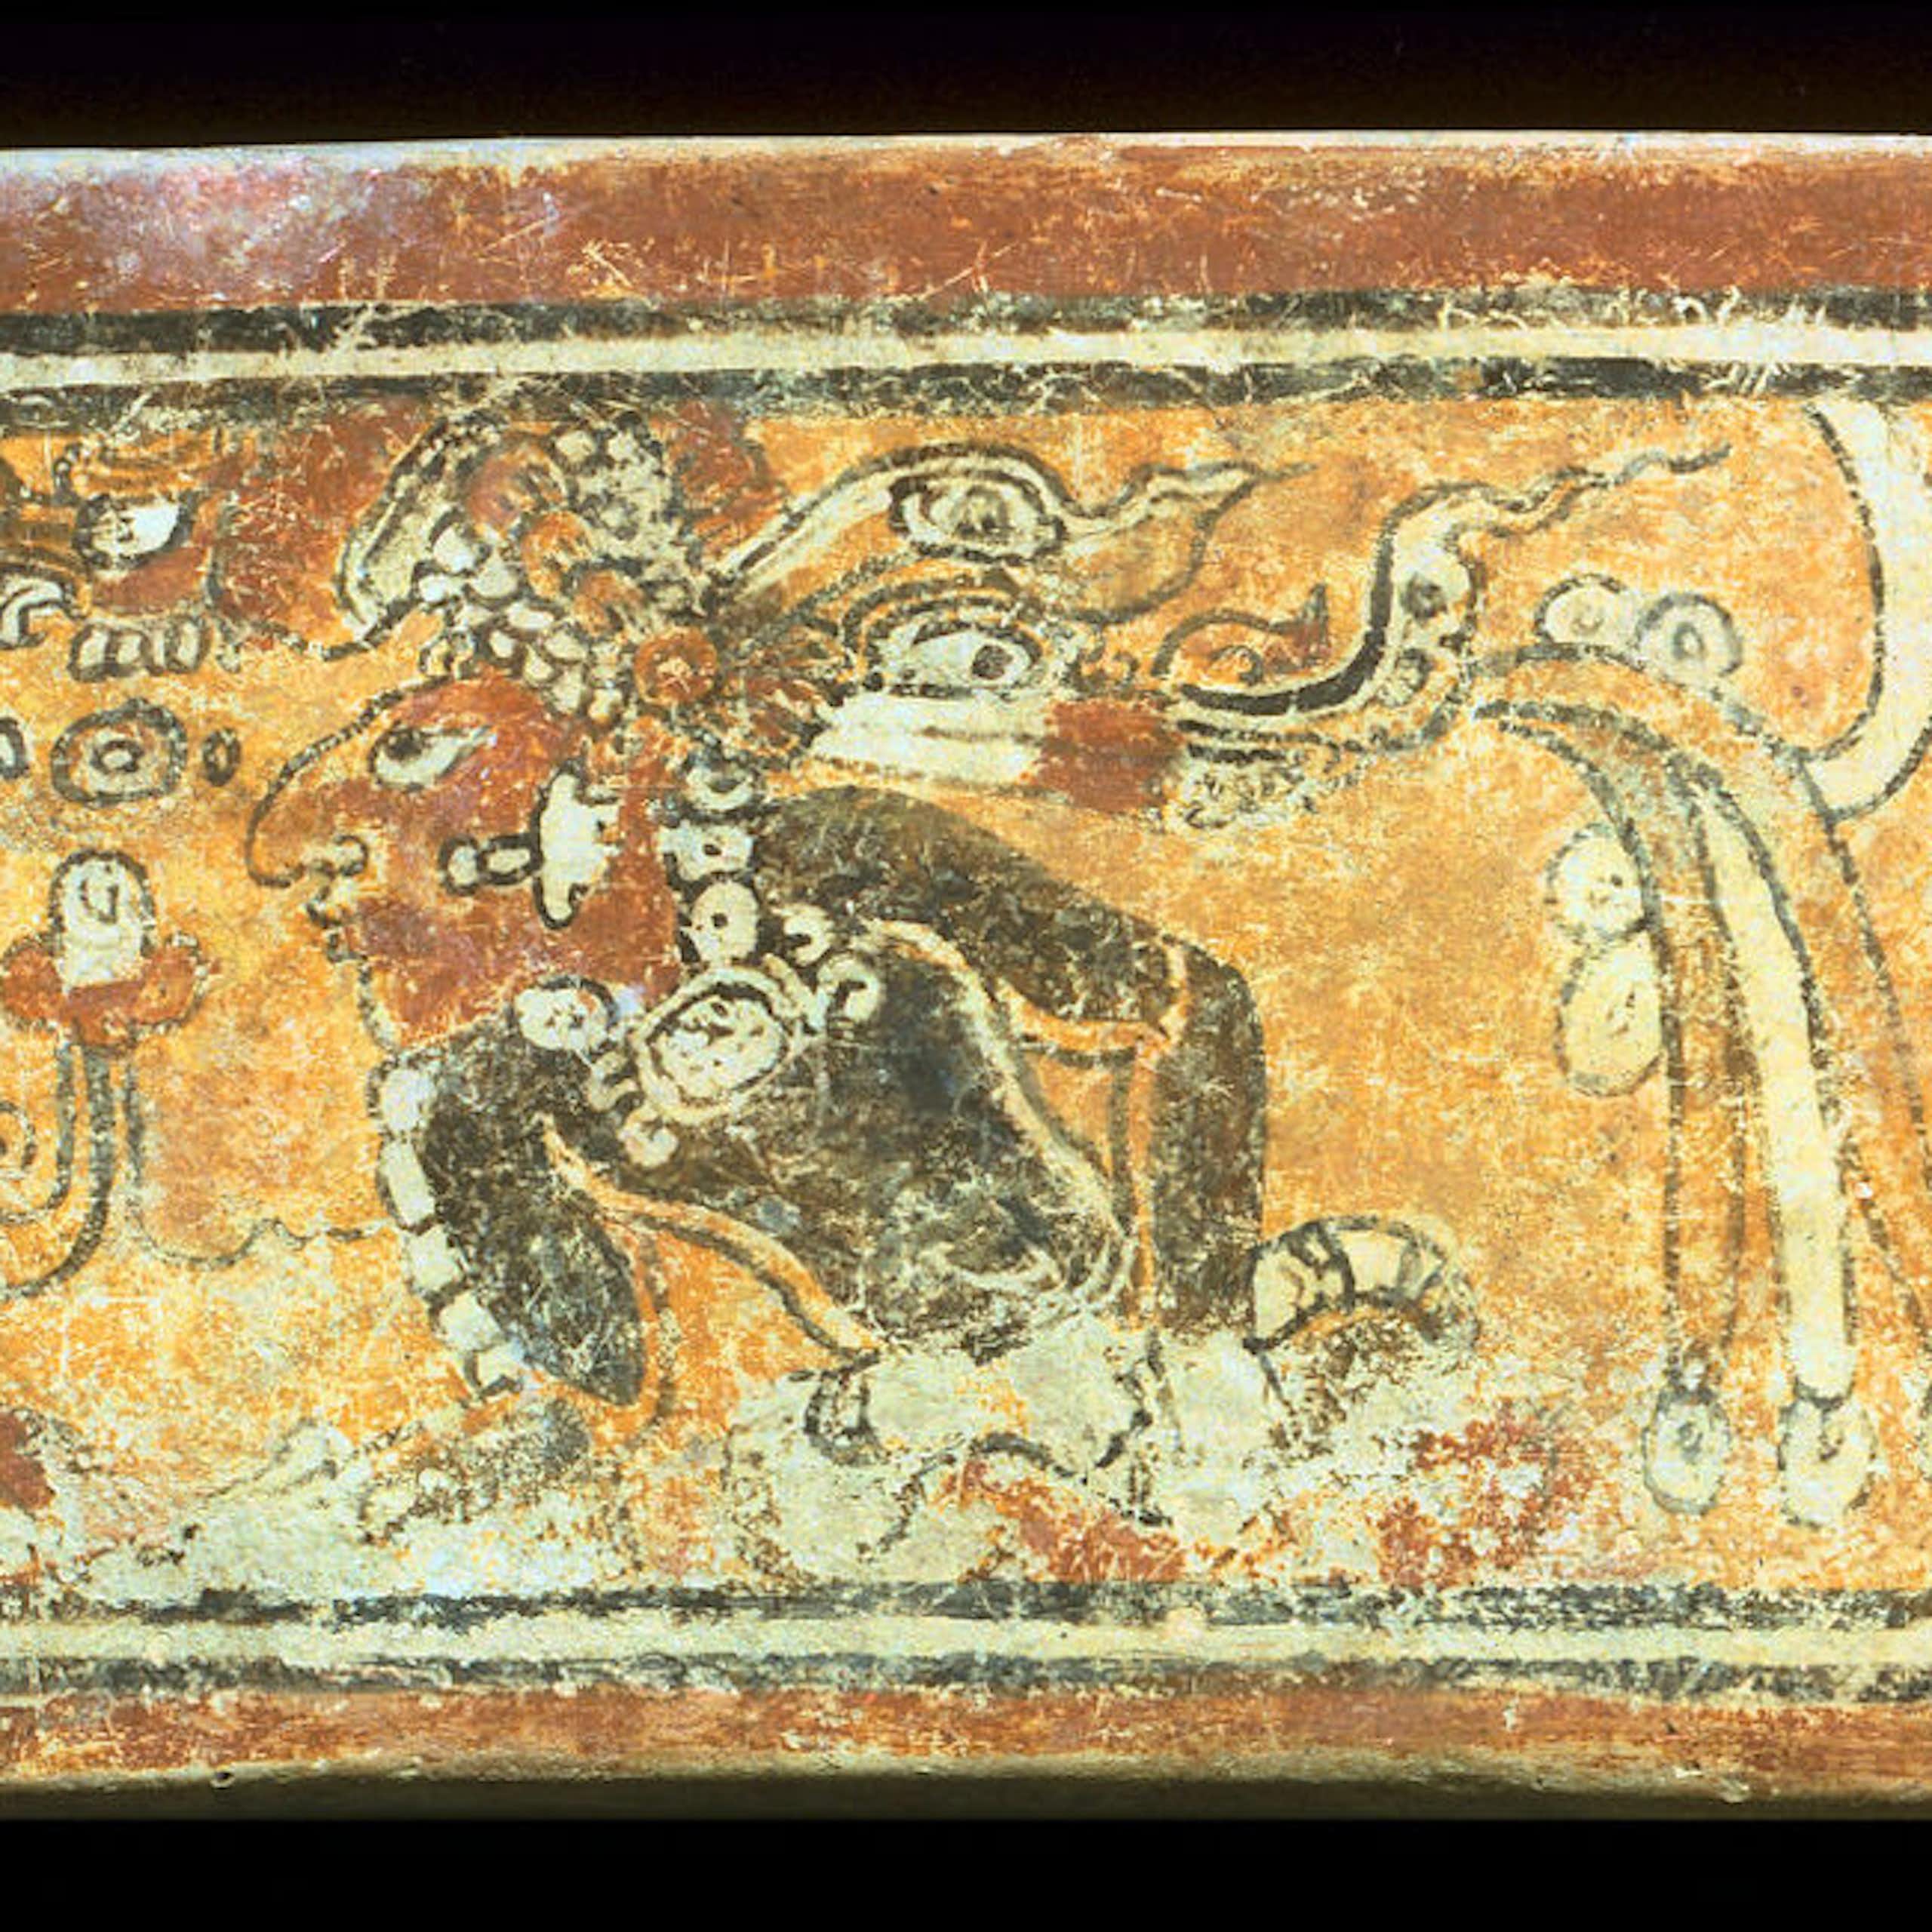 A painting on a yellow background that shows a jaguar with fangs, bloodshot eyes and rabbit ears surrounded by other figures.